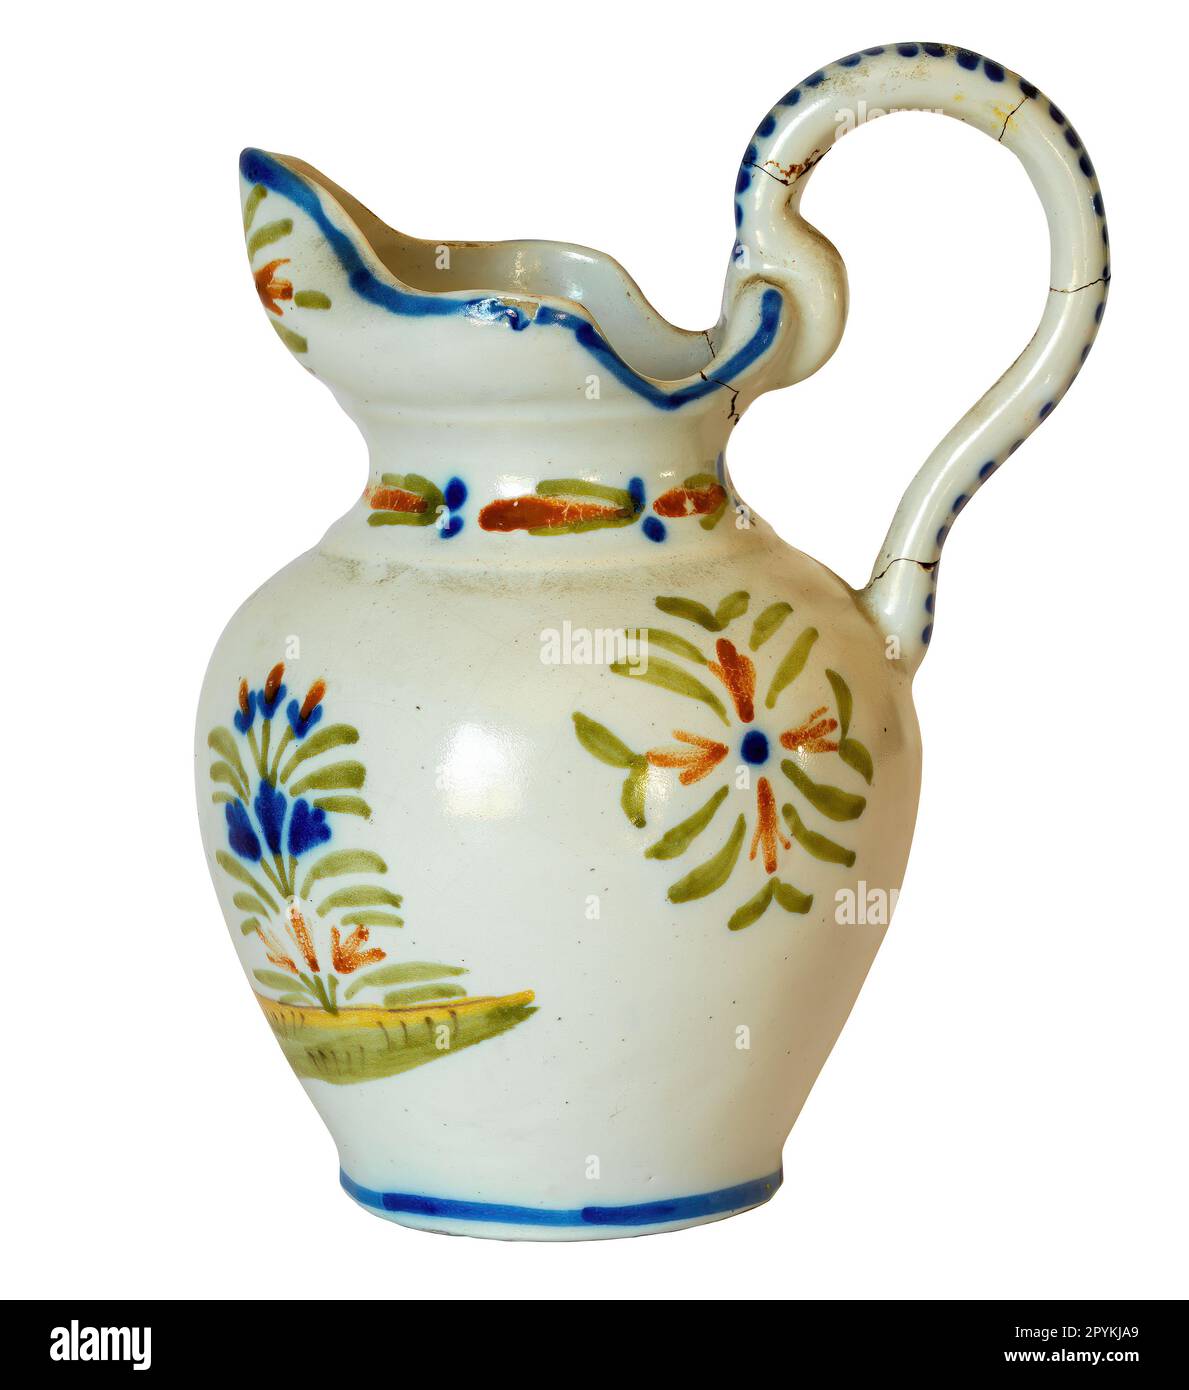 French, White-Glazed Ceramic Jug or Water Cruche, with Lid and floral decoration, isolated on white background Stock Photo